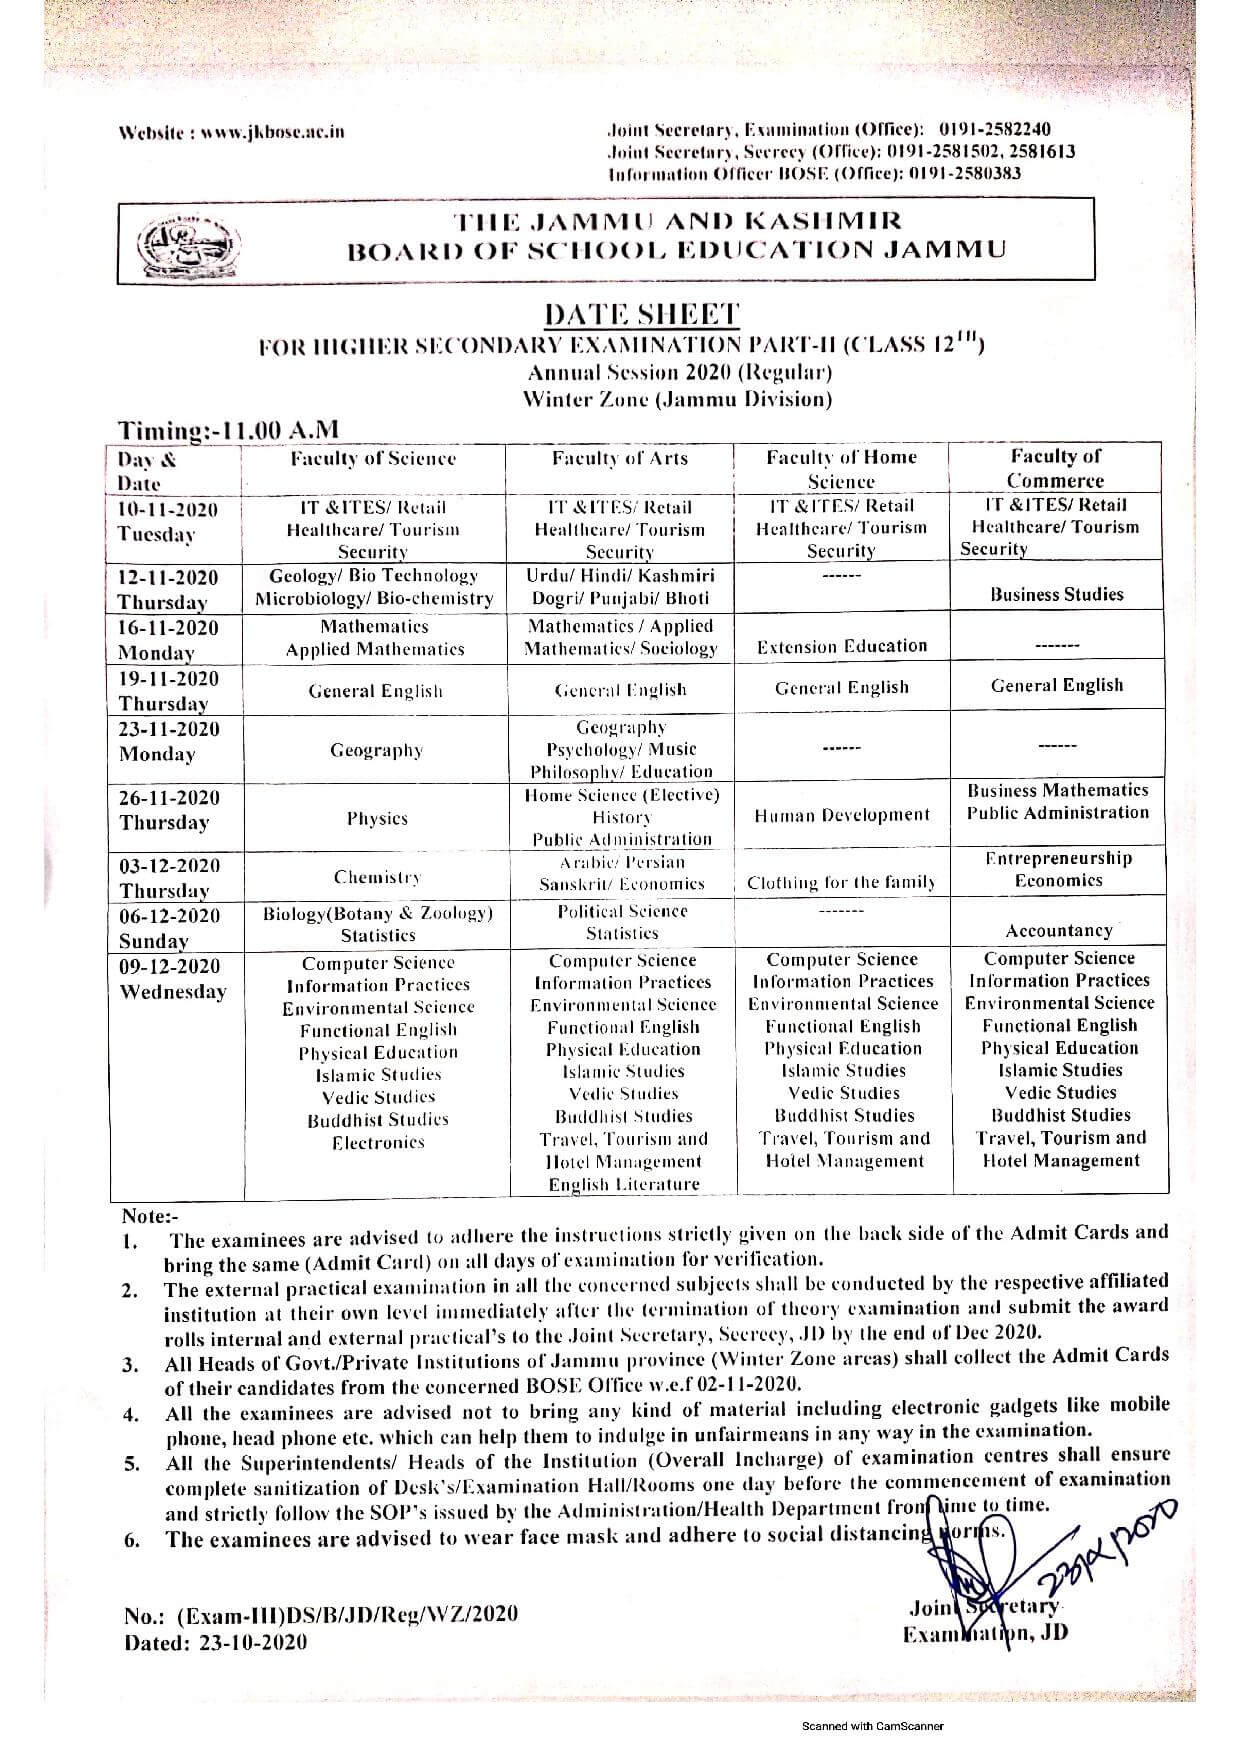 JKBOSE Date Sheet for Class 12th Annual Exam 2020 (Jammu Division)